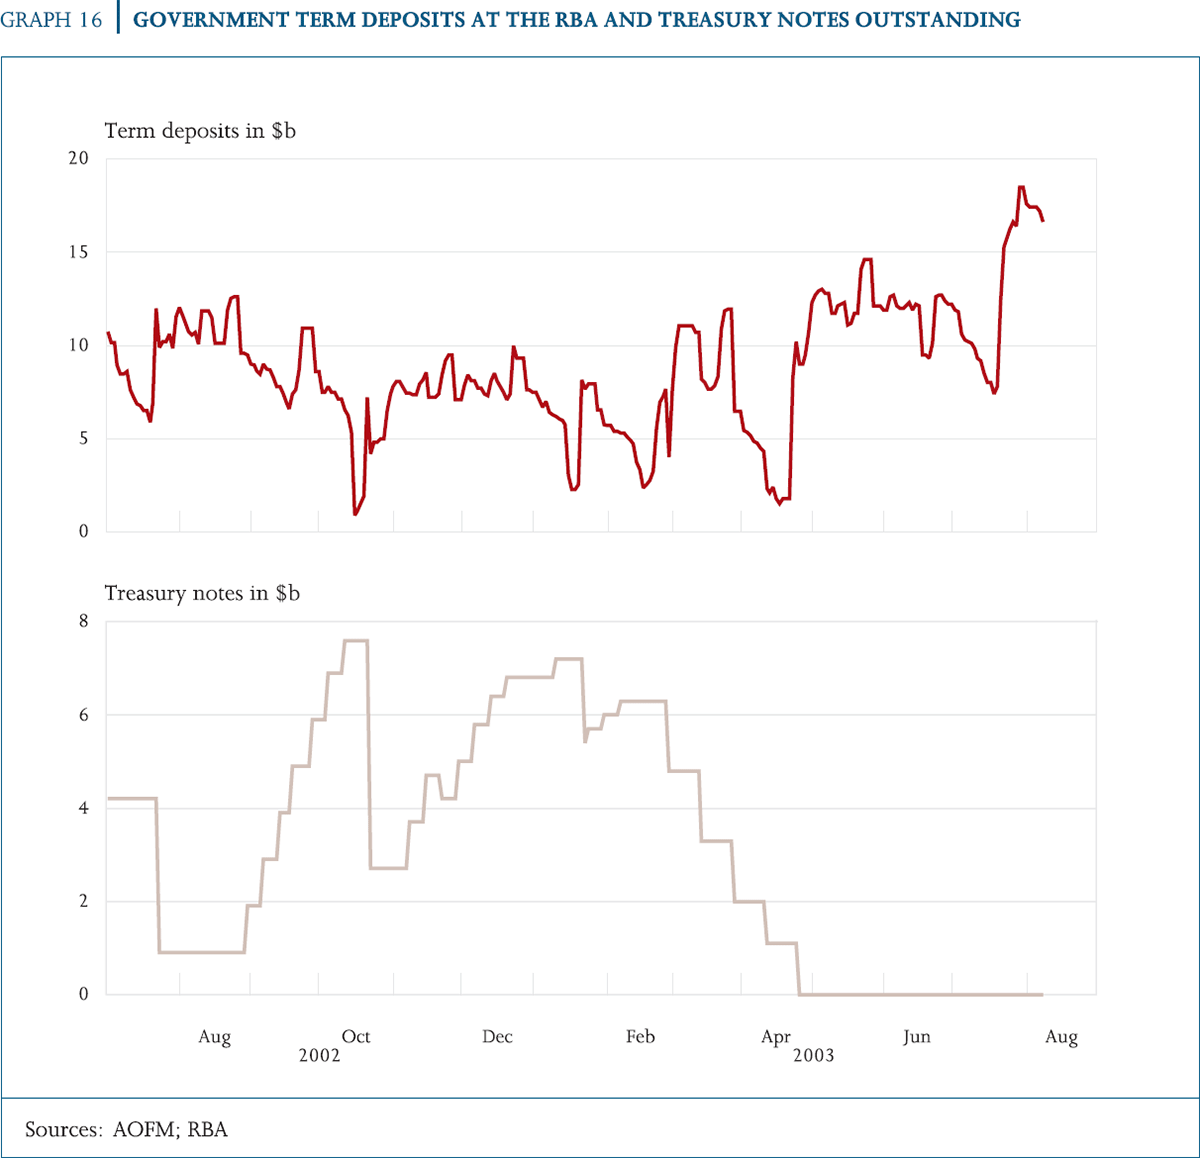 Graph 16: Government Term Deposits at the RBA and Treasury Notes Outstanding